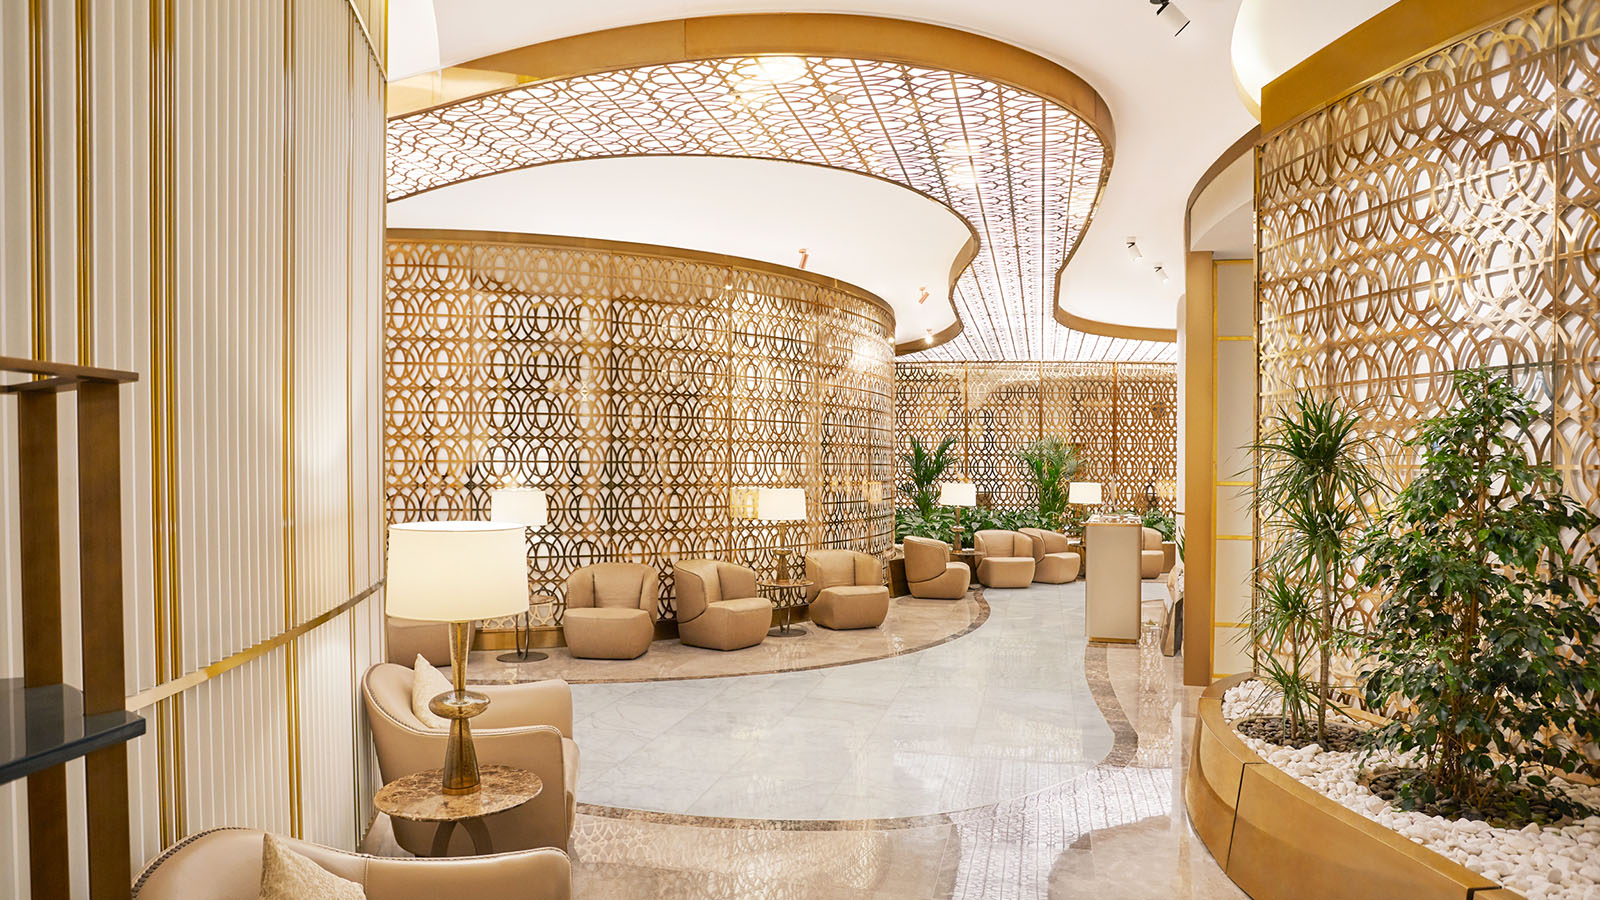 Oman Air Lounge in Muscat